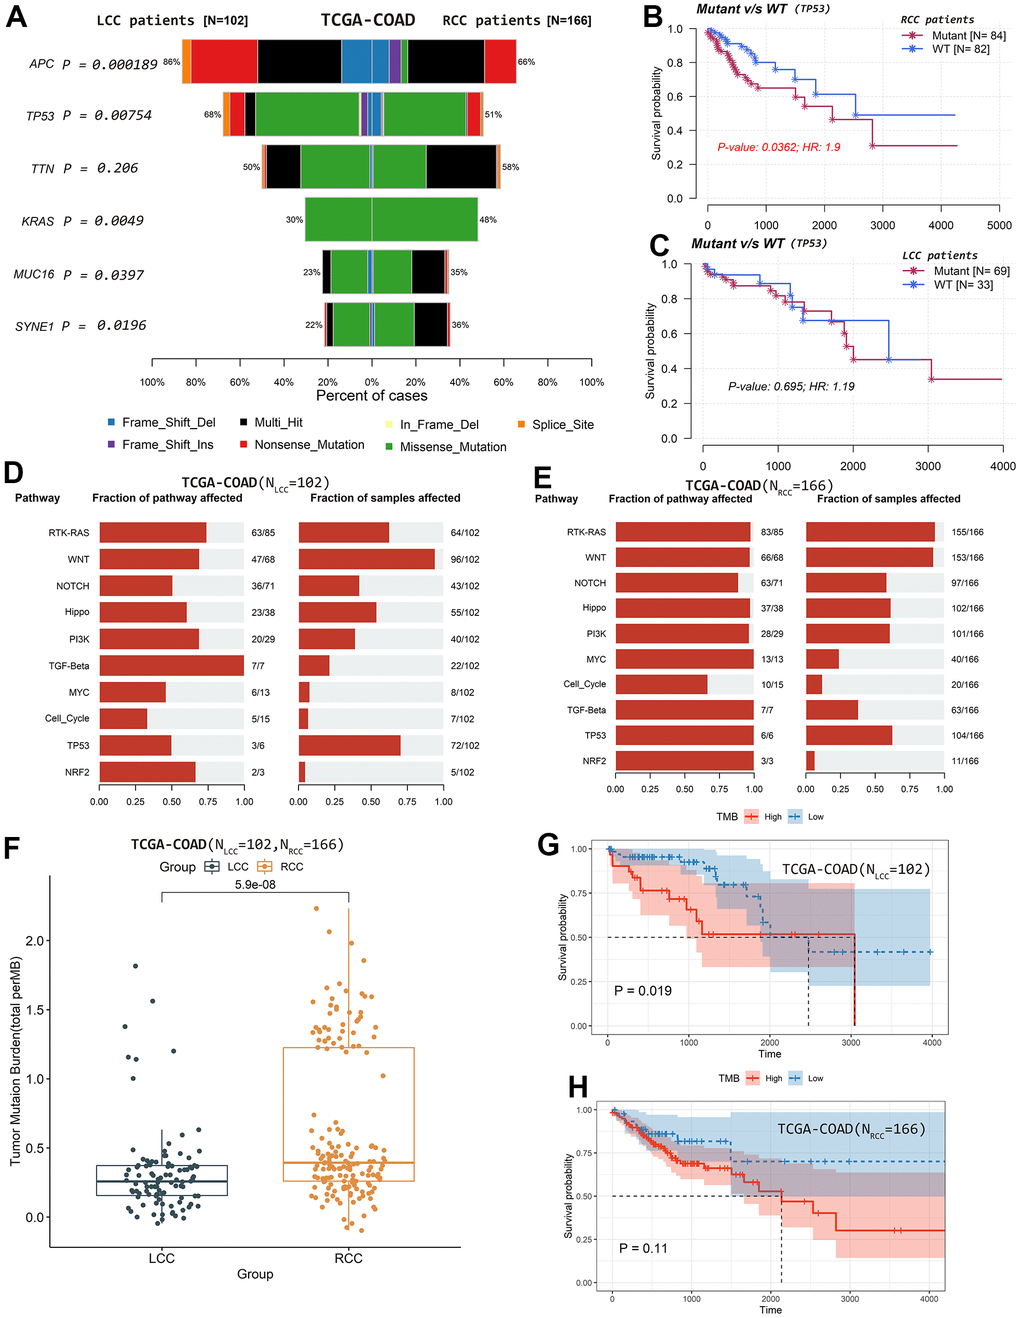 Differences in mutation profiles and affected oncogenic pathways and their relationships with patient OS based on TCGA-COAD cohort. (A) Differences in the top mutated genes. (B) TP53 mutation status was significantly associated with OS in RCC patients. (C) TP53 mutation status was not significantly associated with OS in LCC patients. (D) The fraction of pathways and samples affected by the oncogenic pathways in RCC patients. (E) The fraction of pathways and samples affected by the oncogenic pathways in LCC patients. (F) TMB values were significantly higher in RCC than in LCC patients. (G) LCC patients with lower TMB values had better OS. (H) TMB values were not significantly associated with OS in RCC patients.